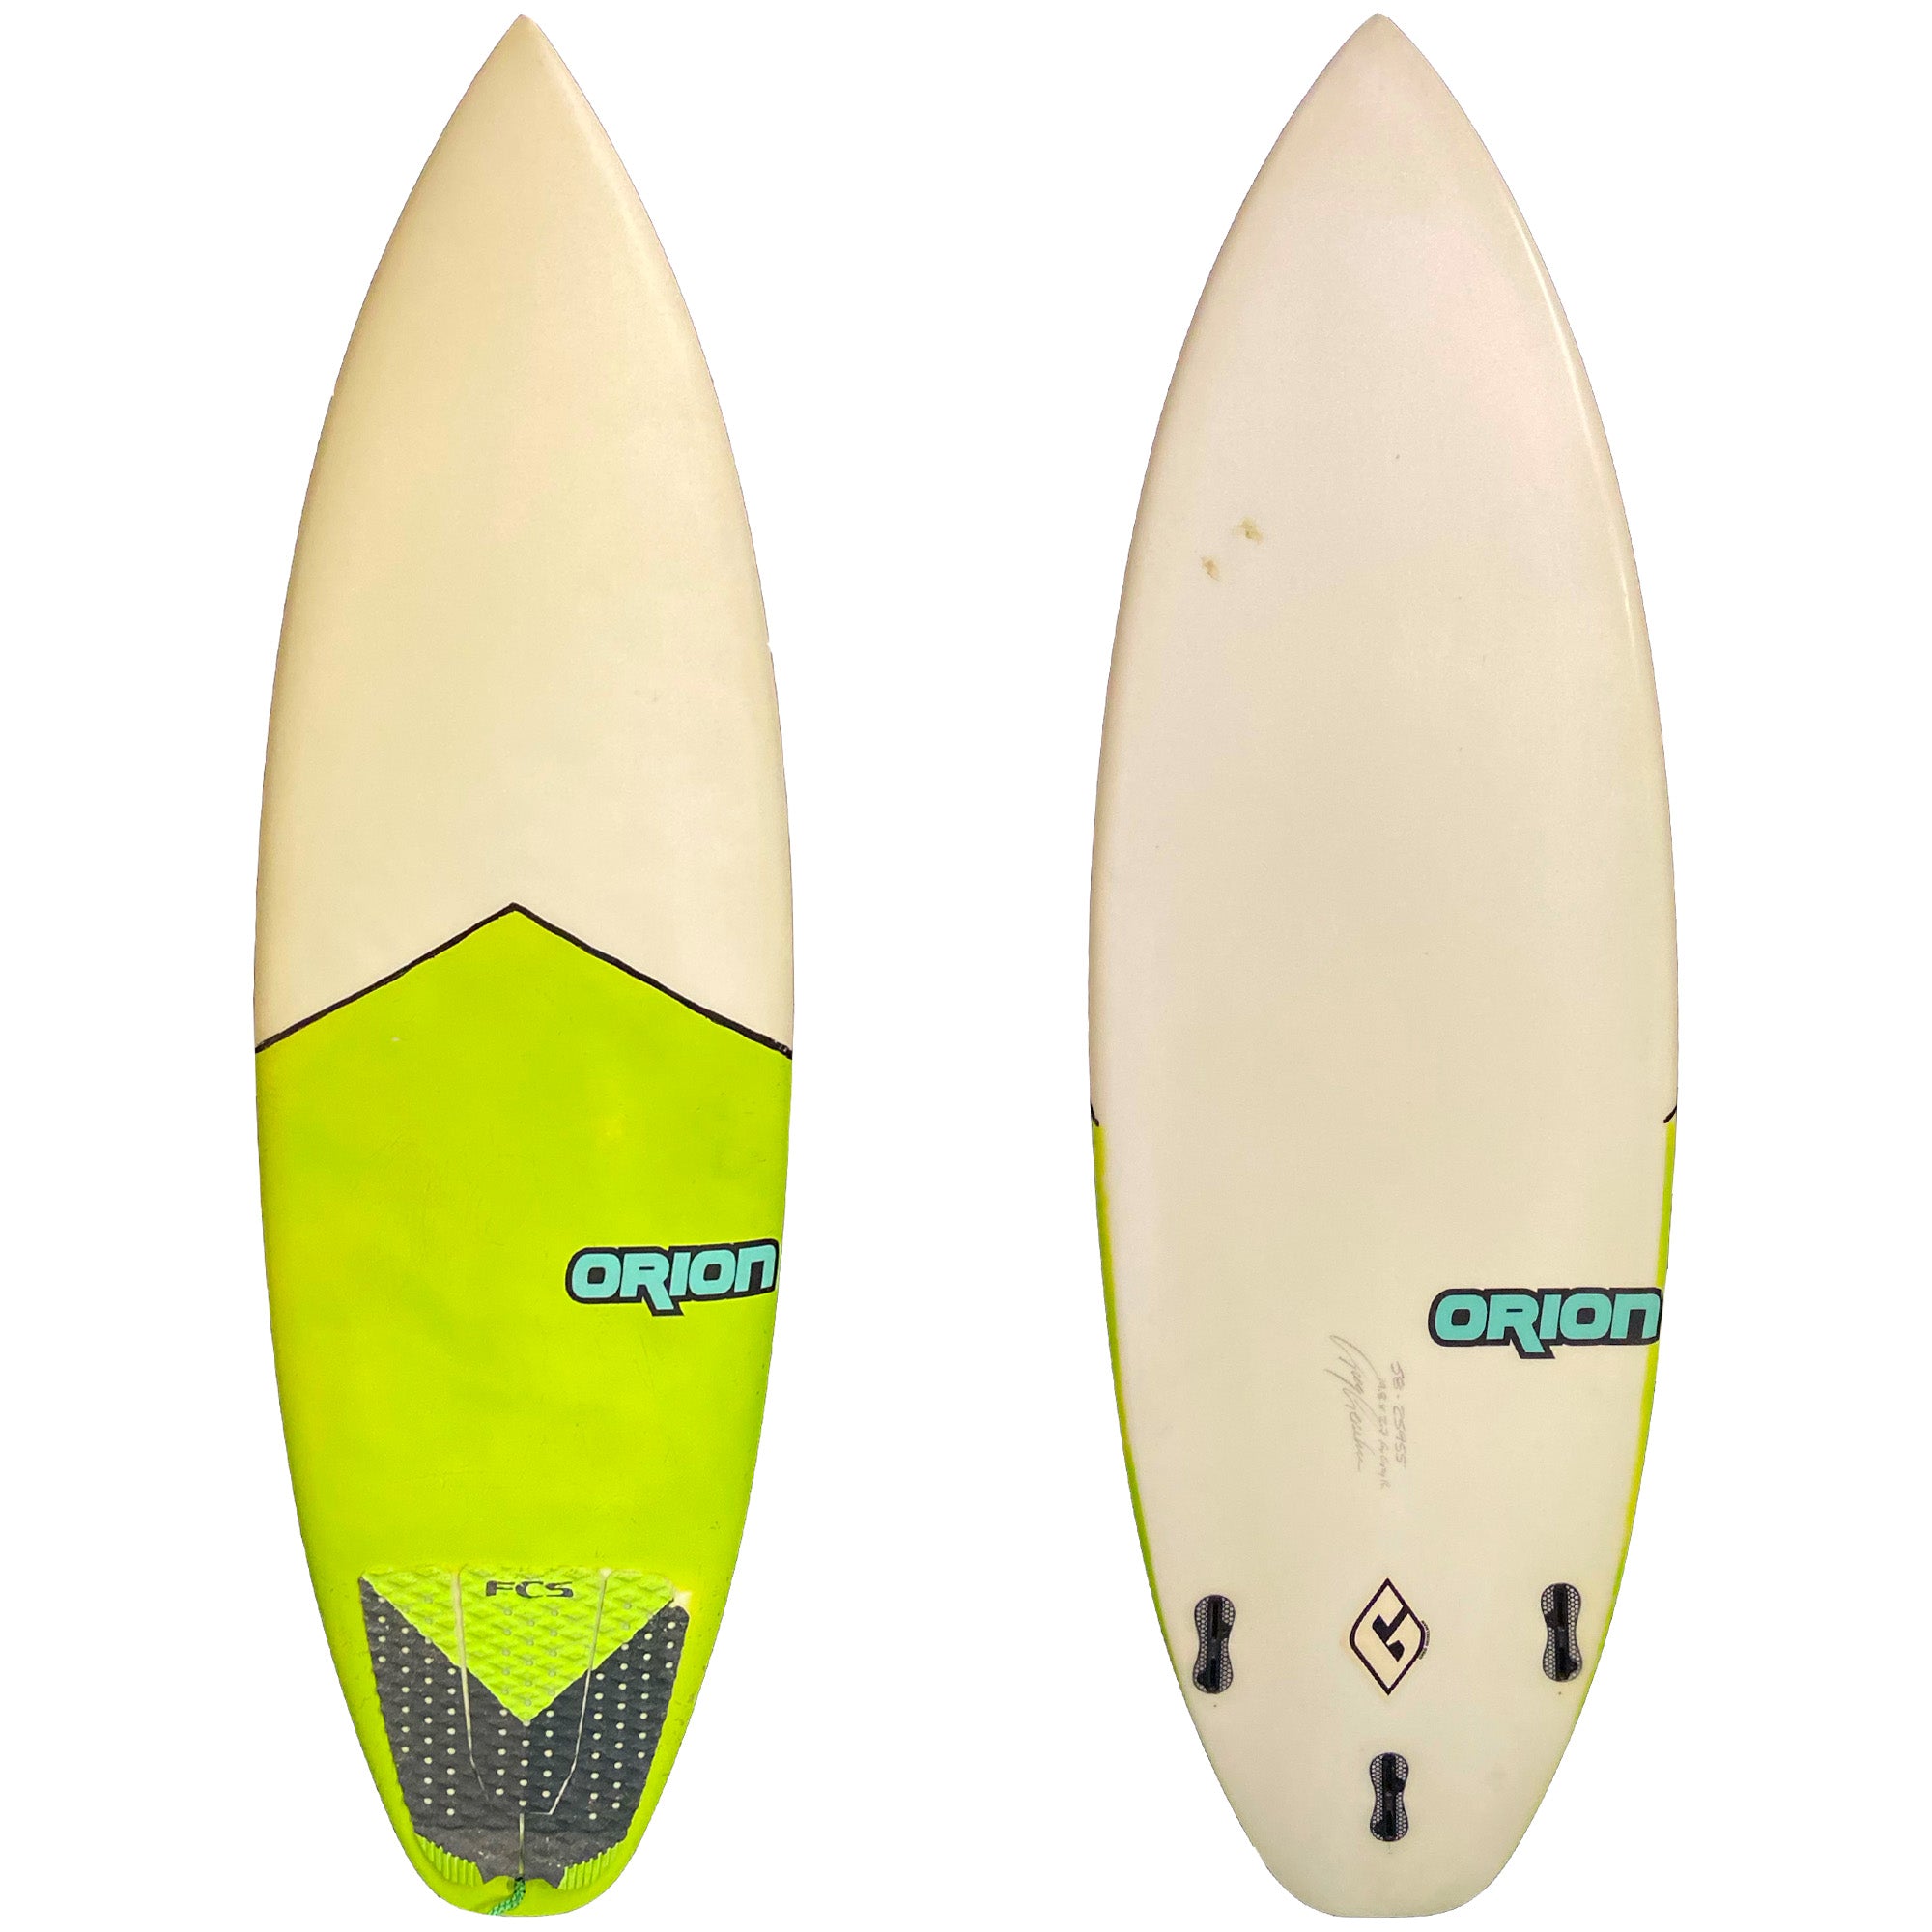 Orion 5'8 Consignment Surfboard